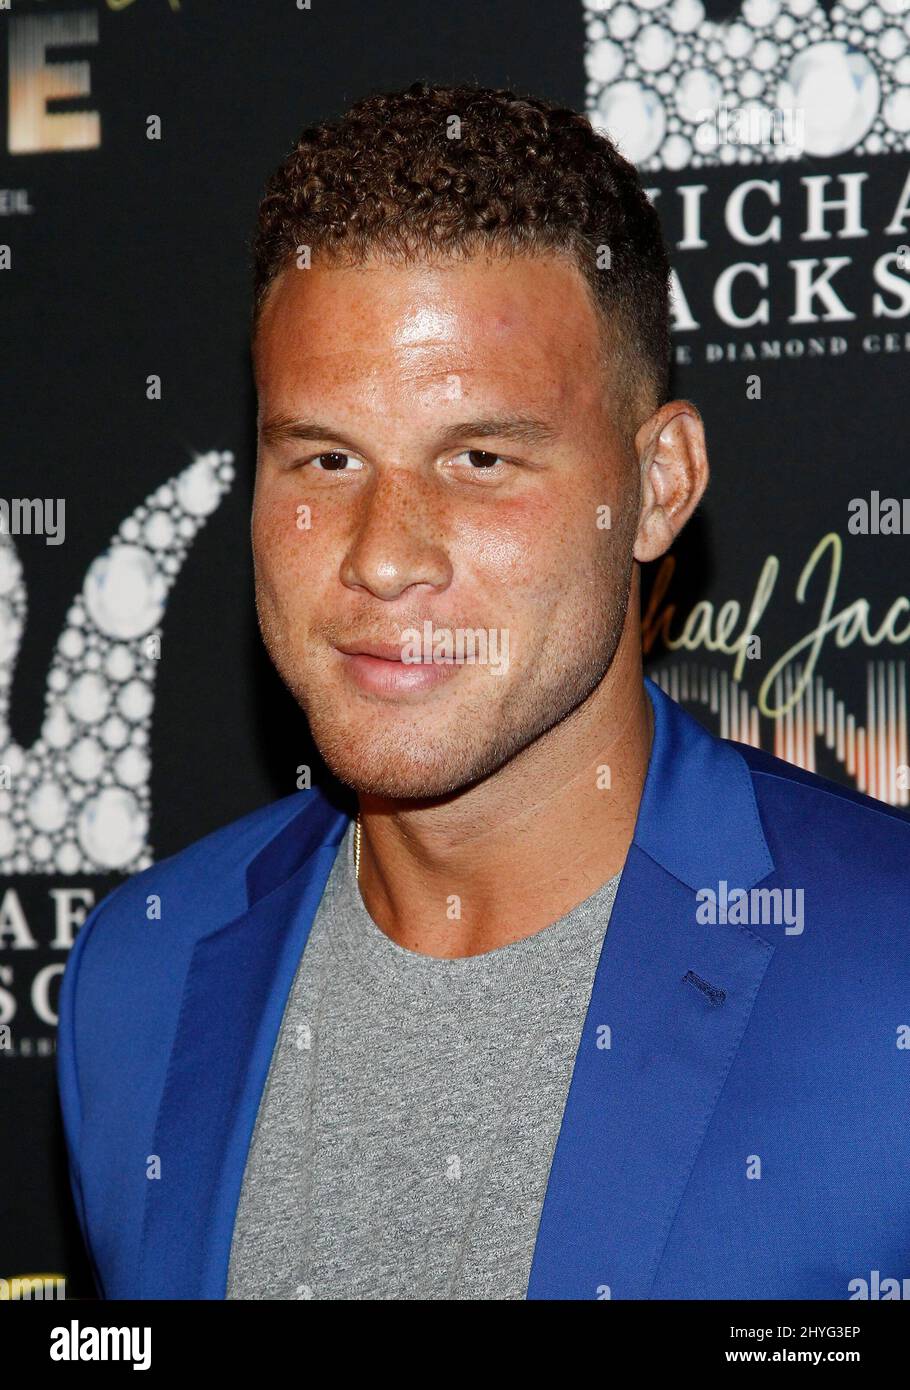 Blake Griffin Photograph by Juan Ocampo - Pixels